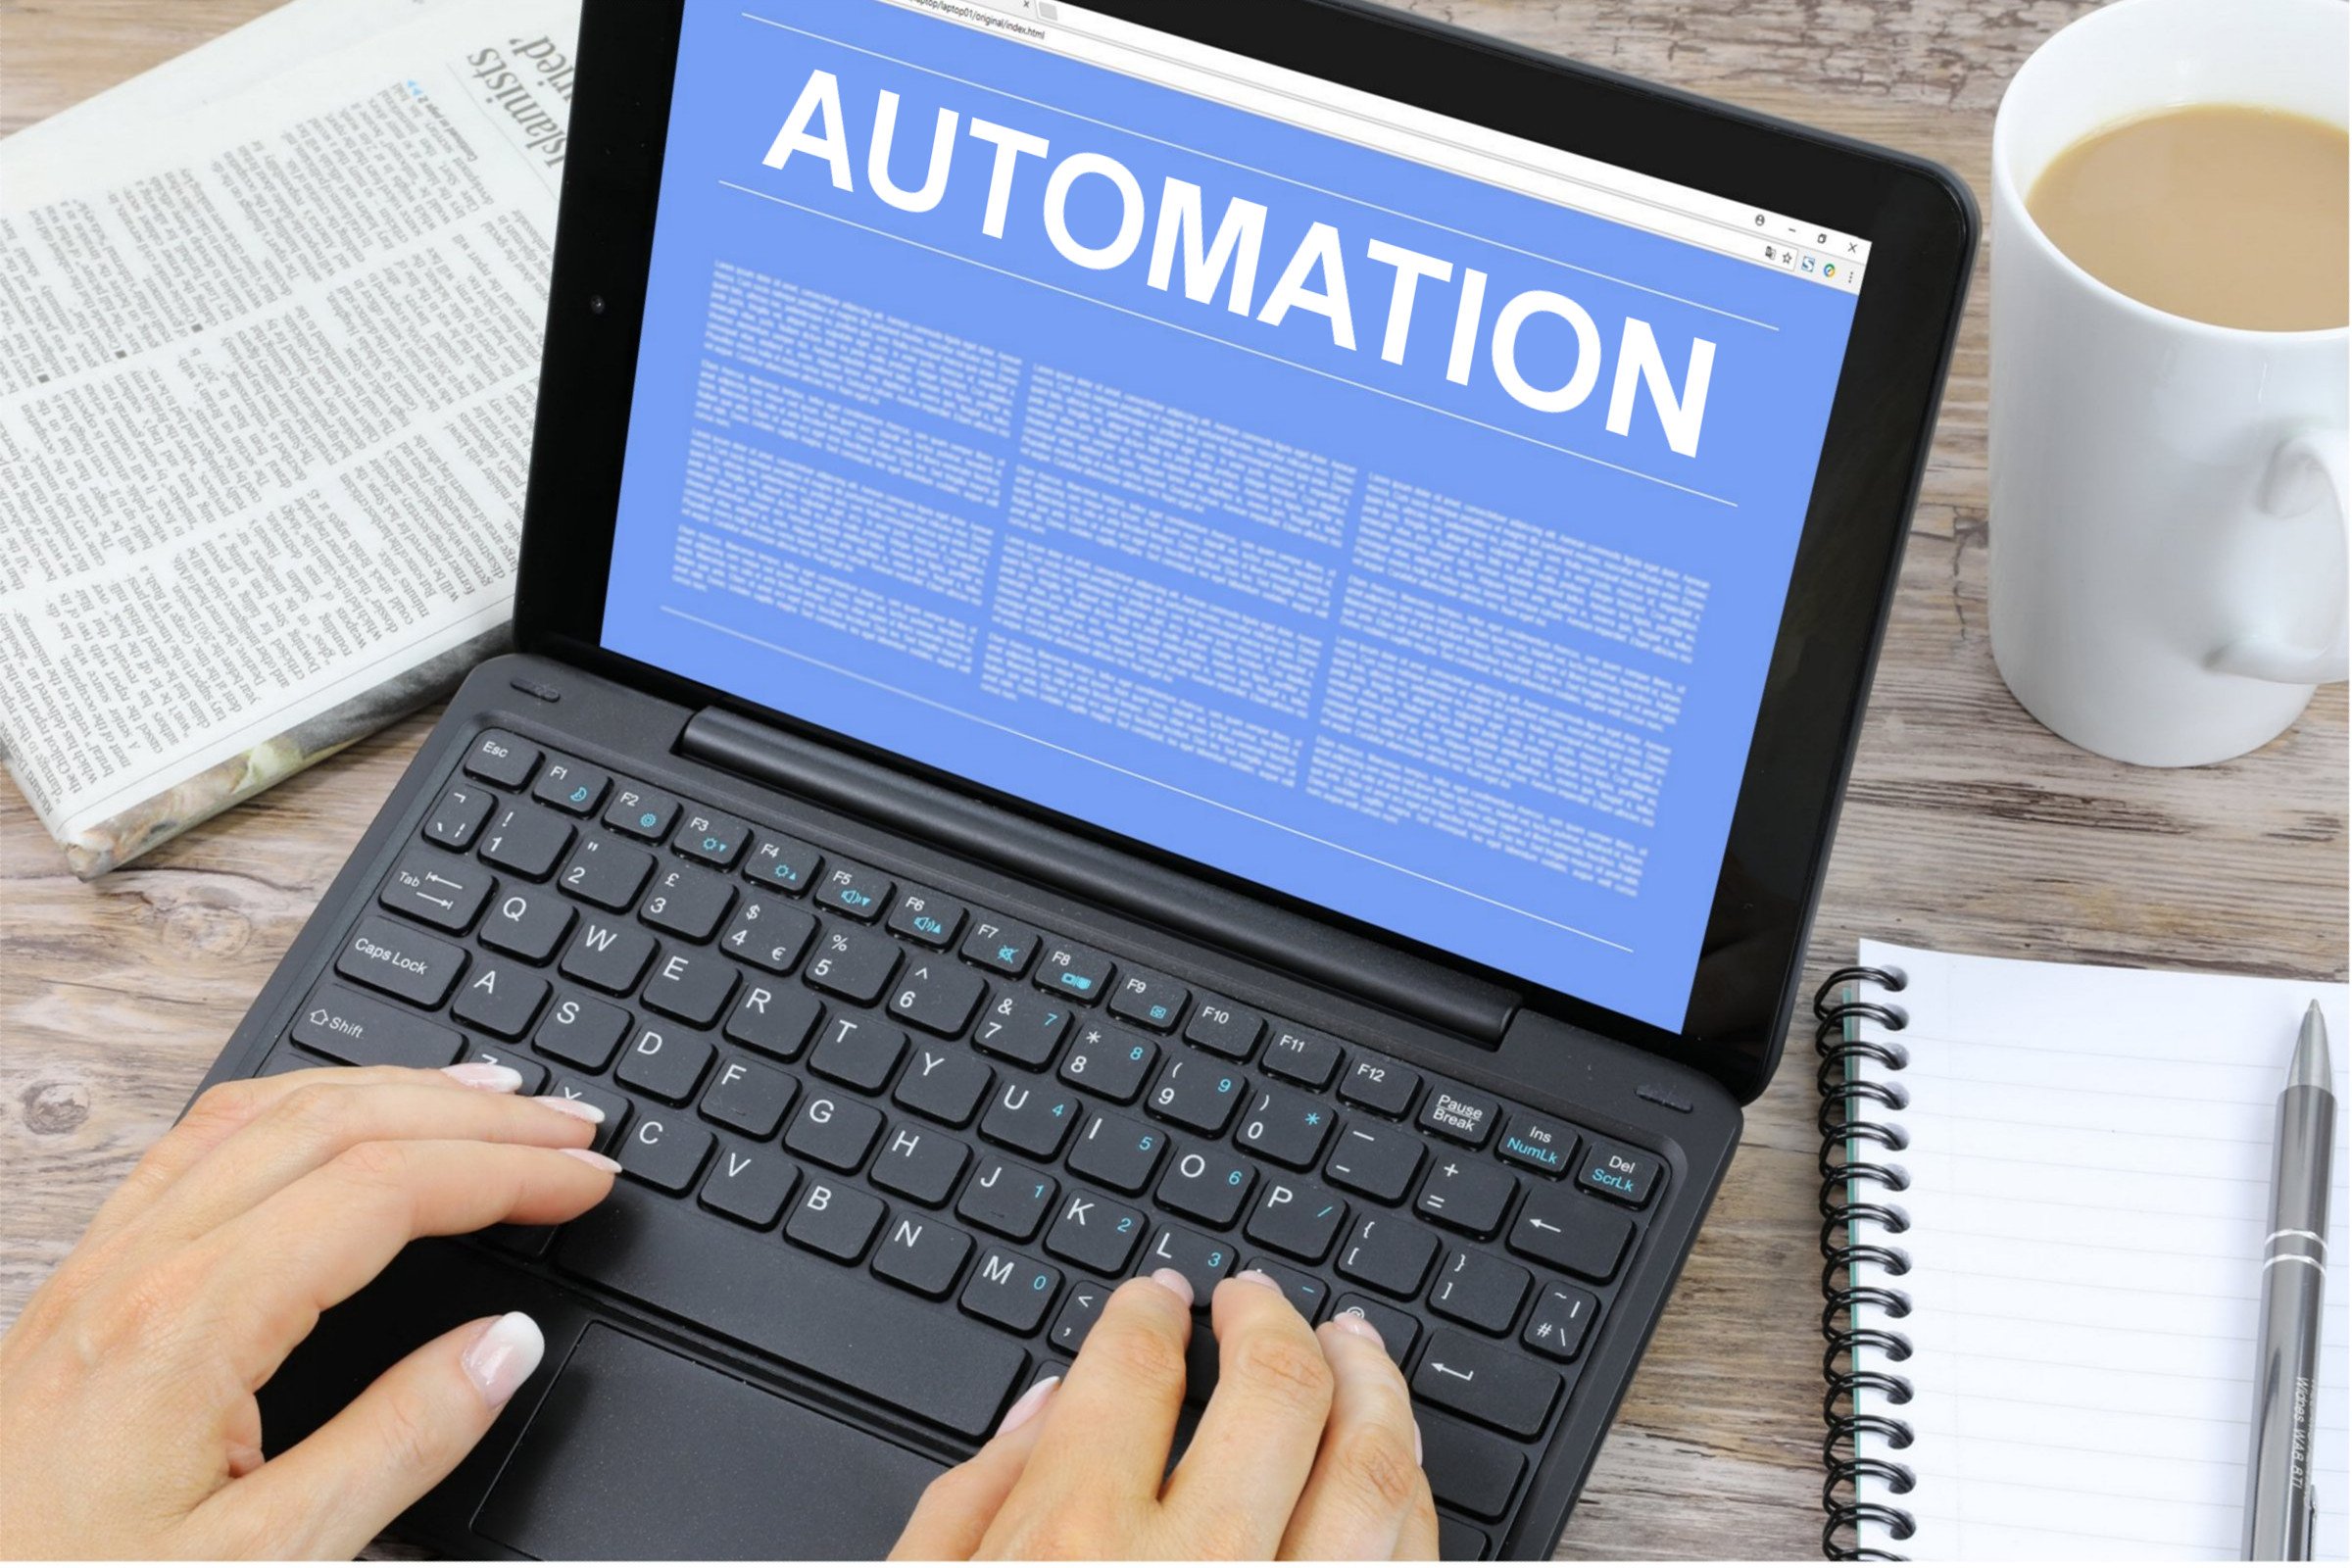 Key Areas Where Process Automation Software Can Improve Your Company’s Bottom Line